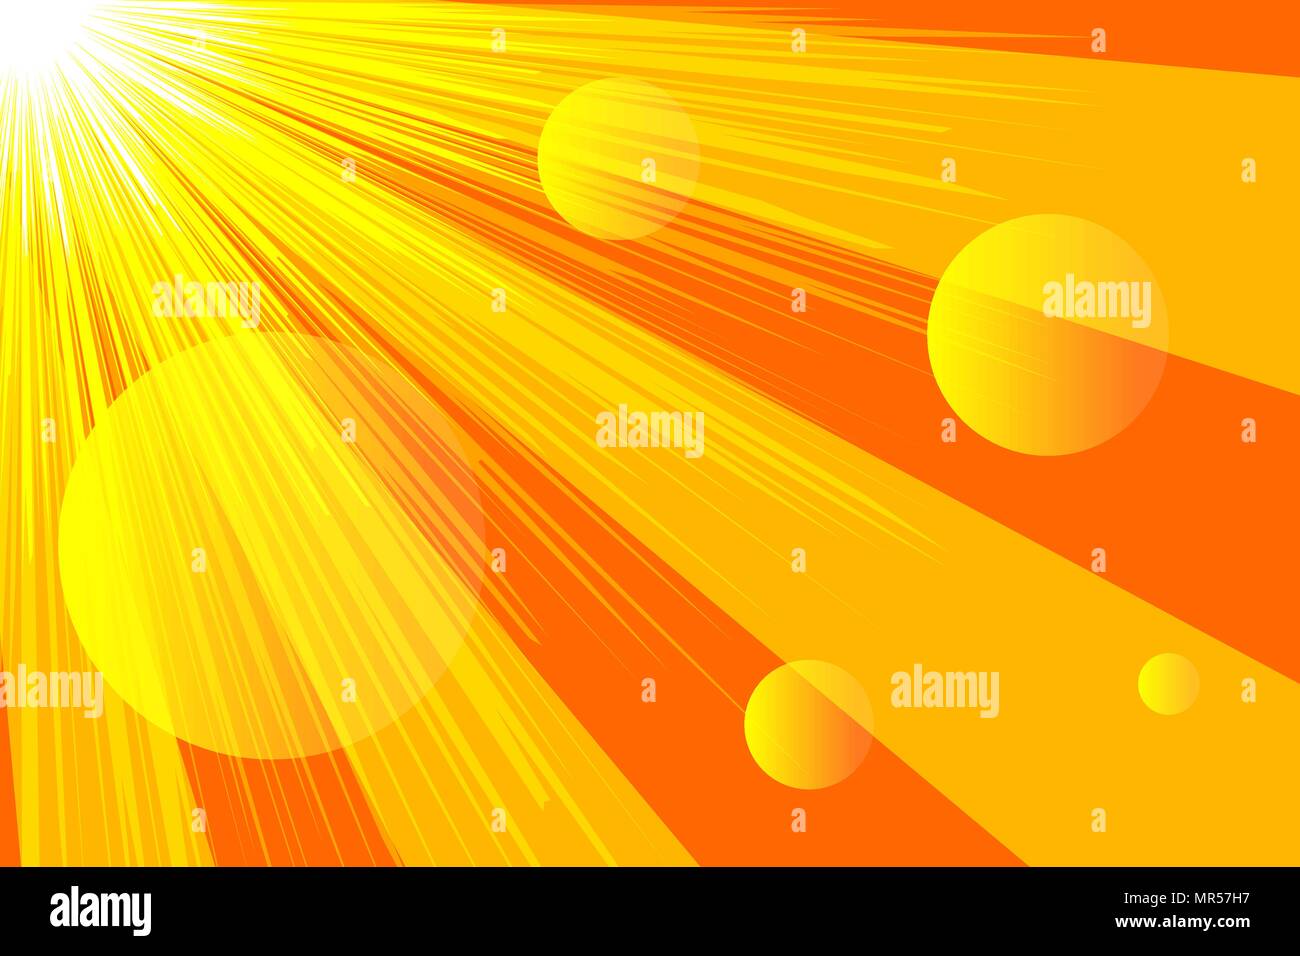  Banner  sunlight rays abstract yellow and orange  summer 